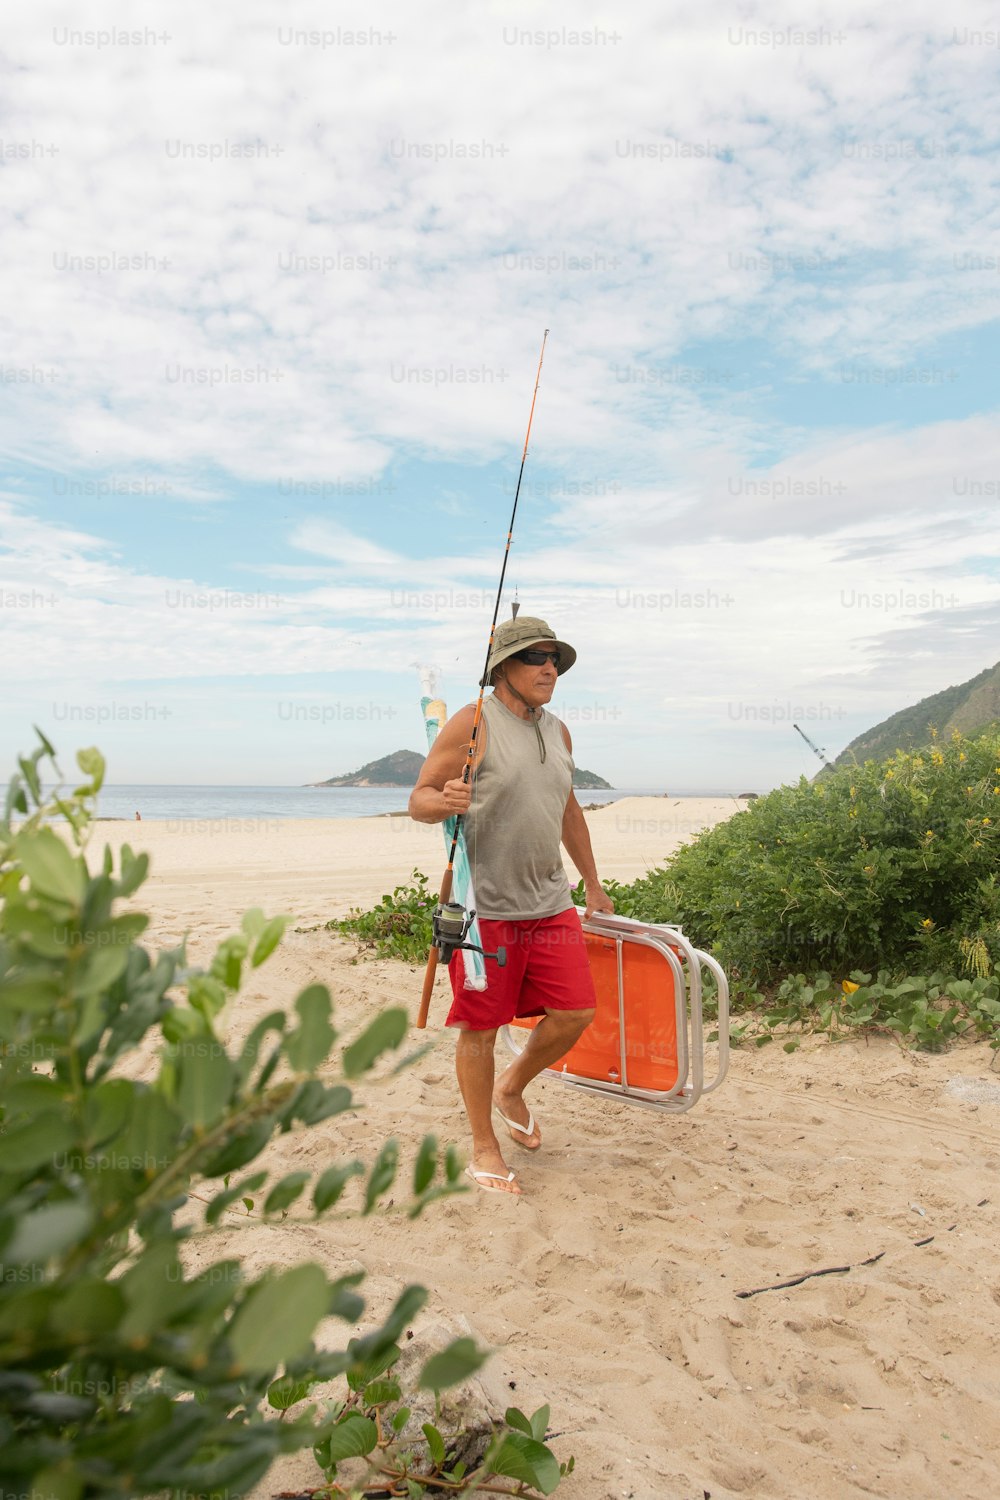 a man walking on a beach carrying a suitcase